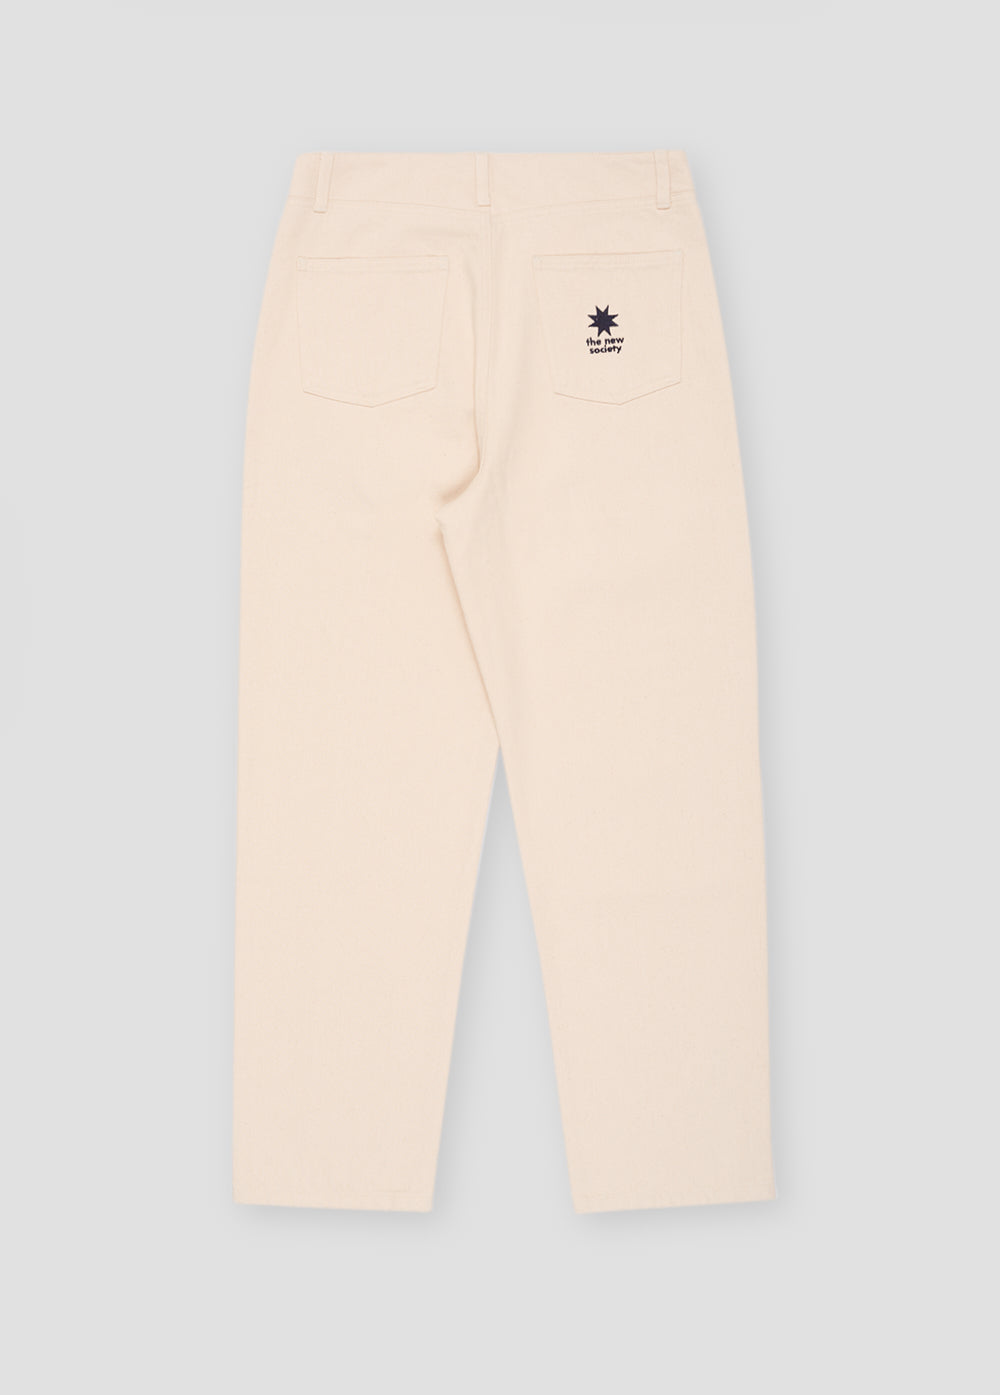 Cosmos Woman Pant Sand